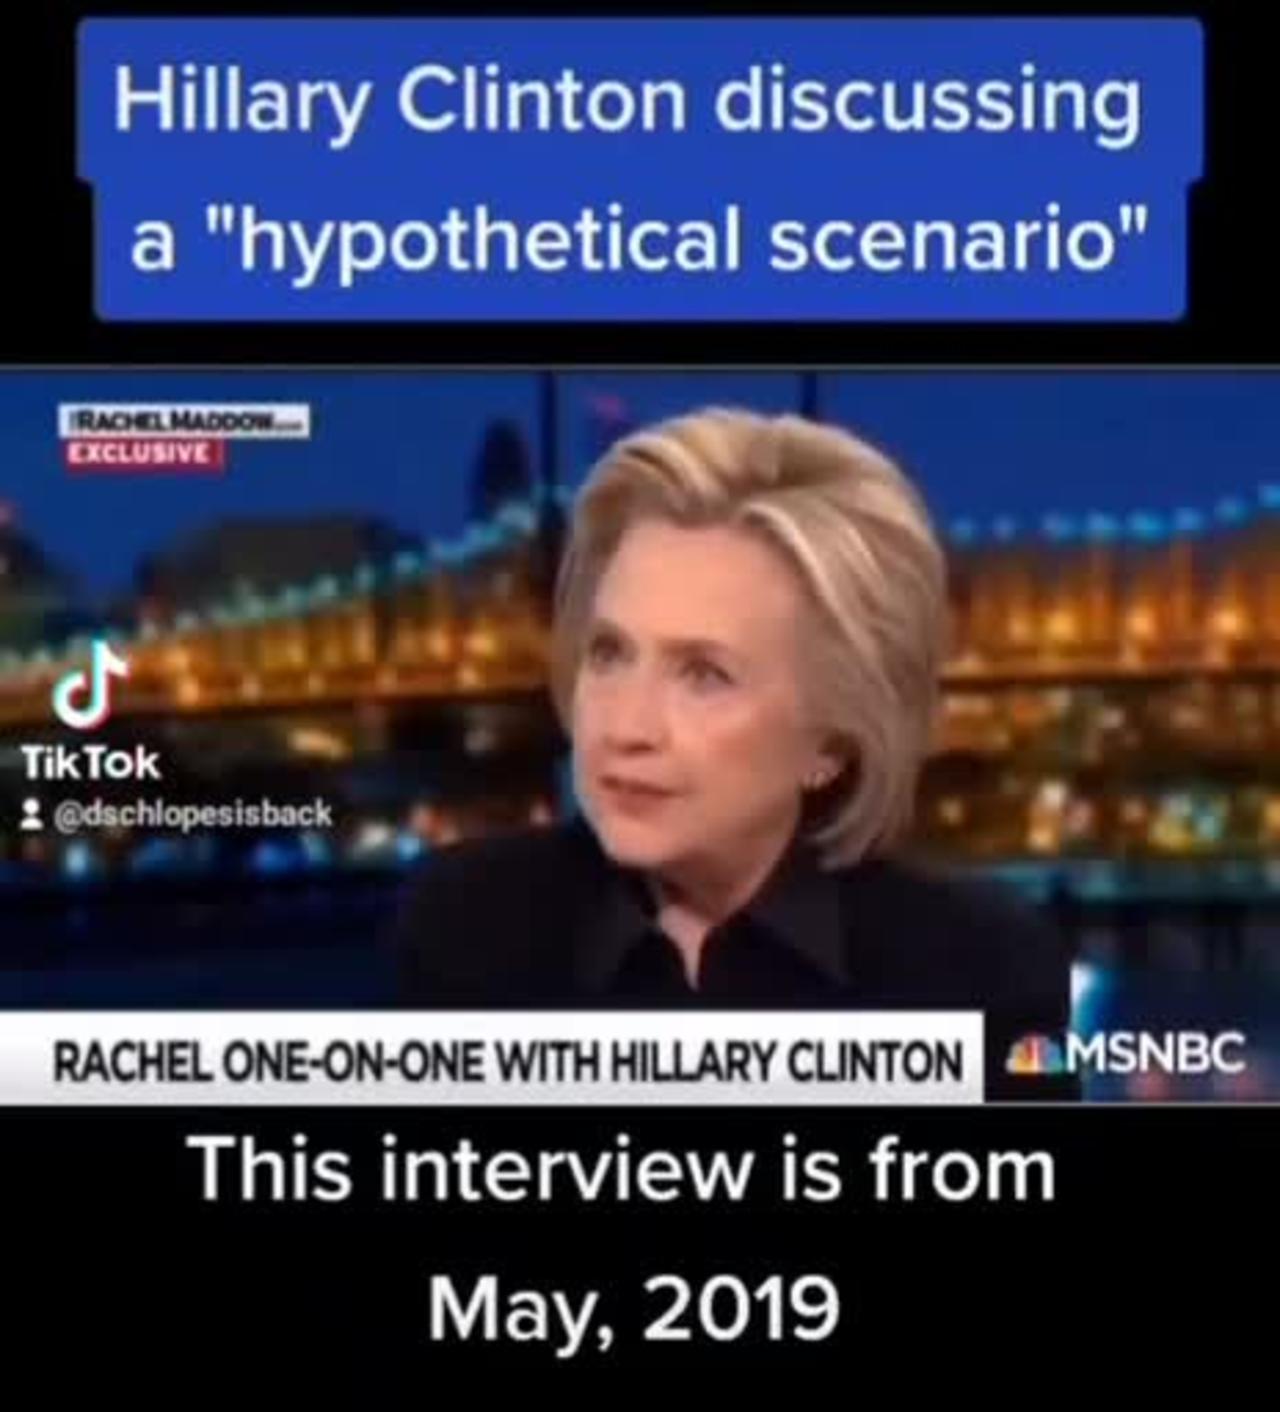 Hillary Clinton video from May 2019.